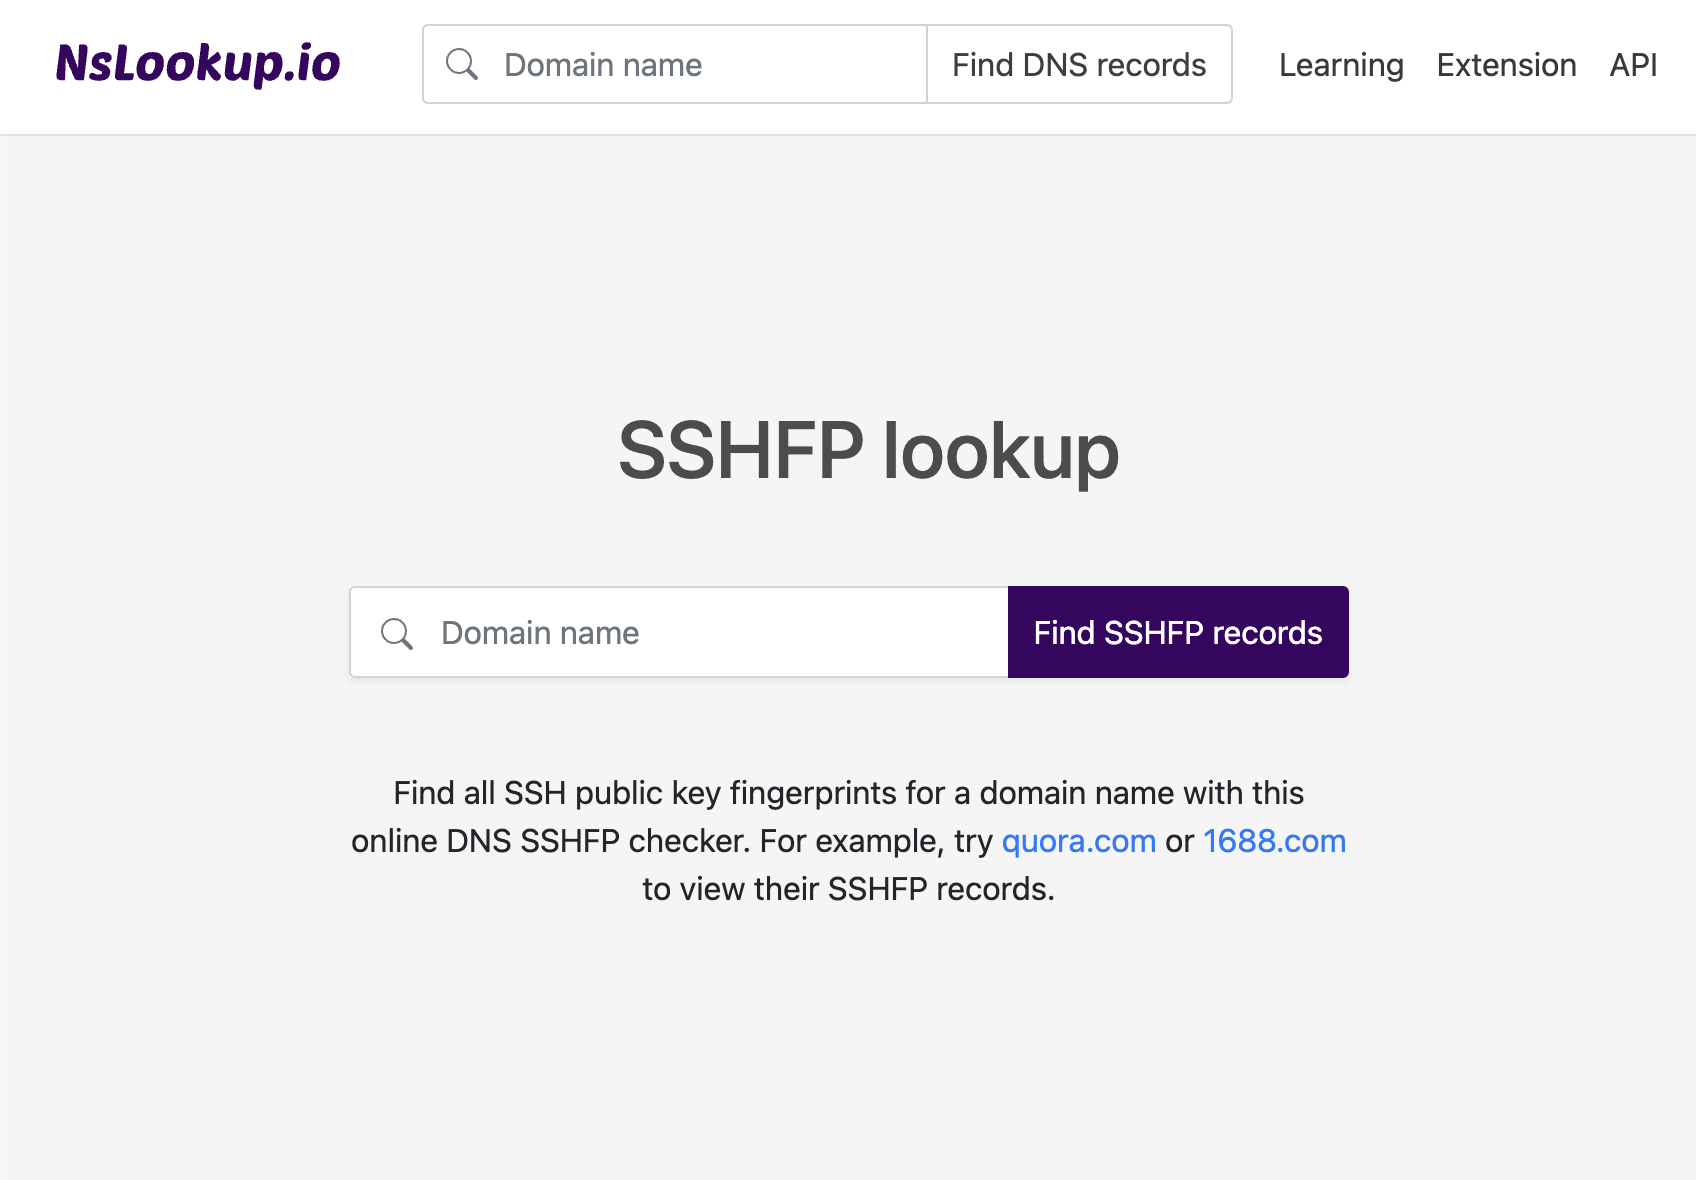 Open the SSHFP lookup tool